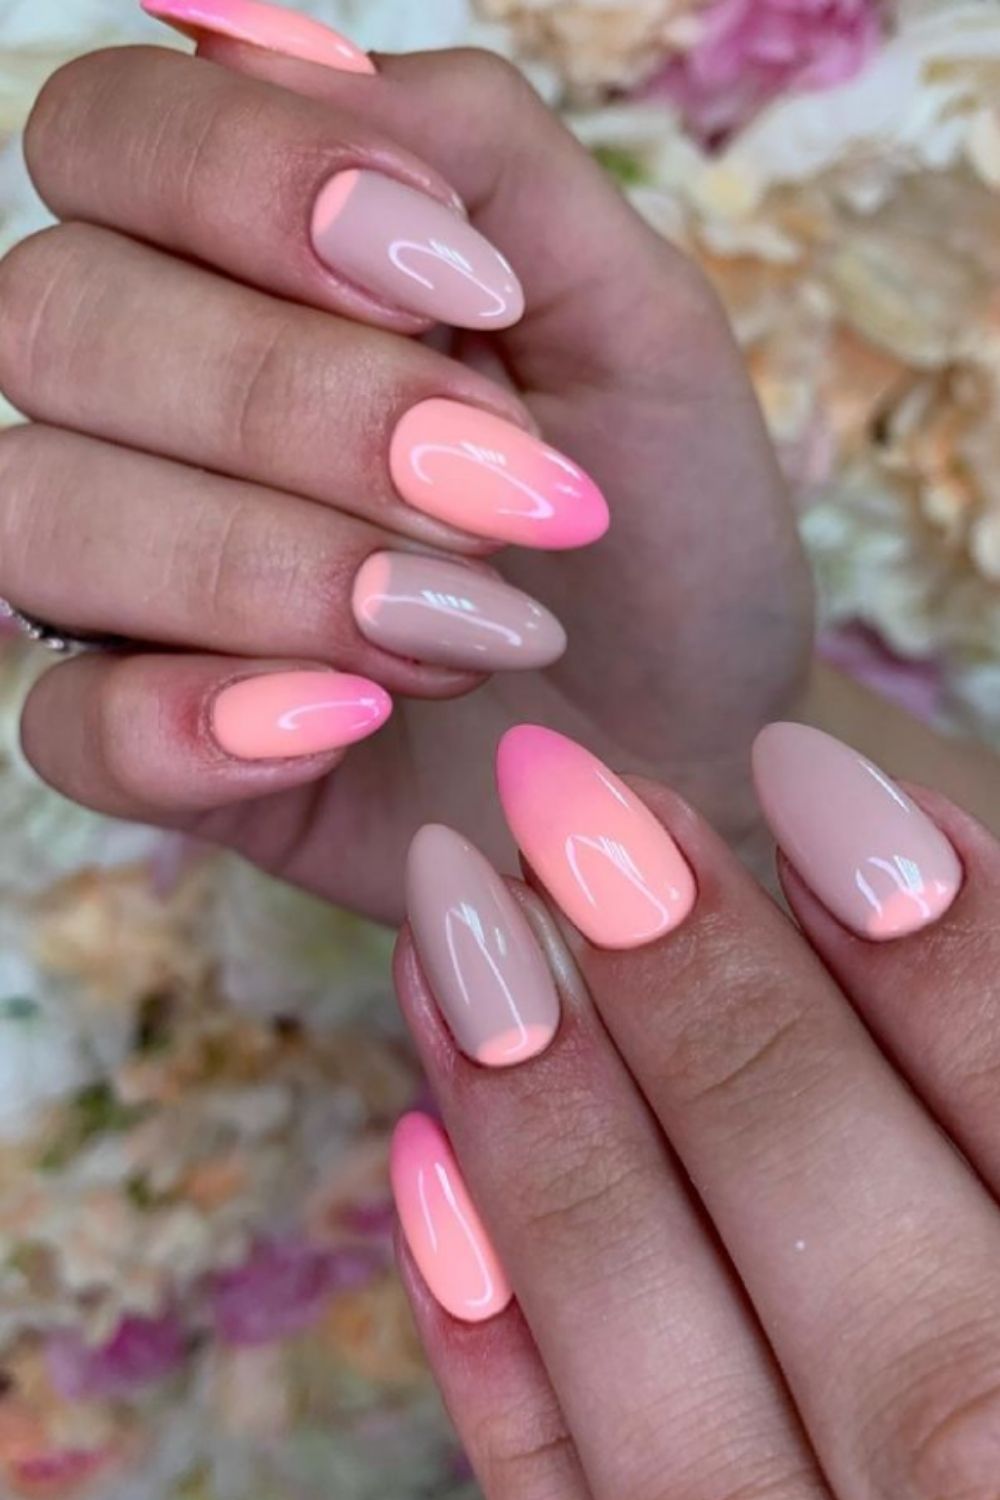 Pink ombre nails | the Millennial Version of a French Manicure